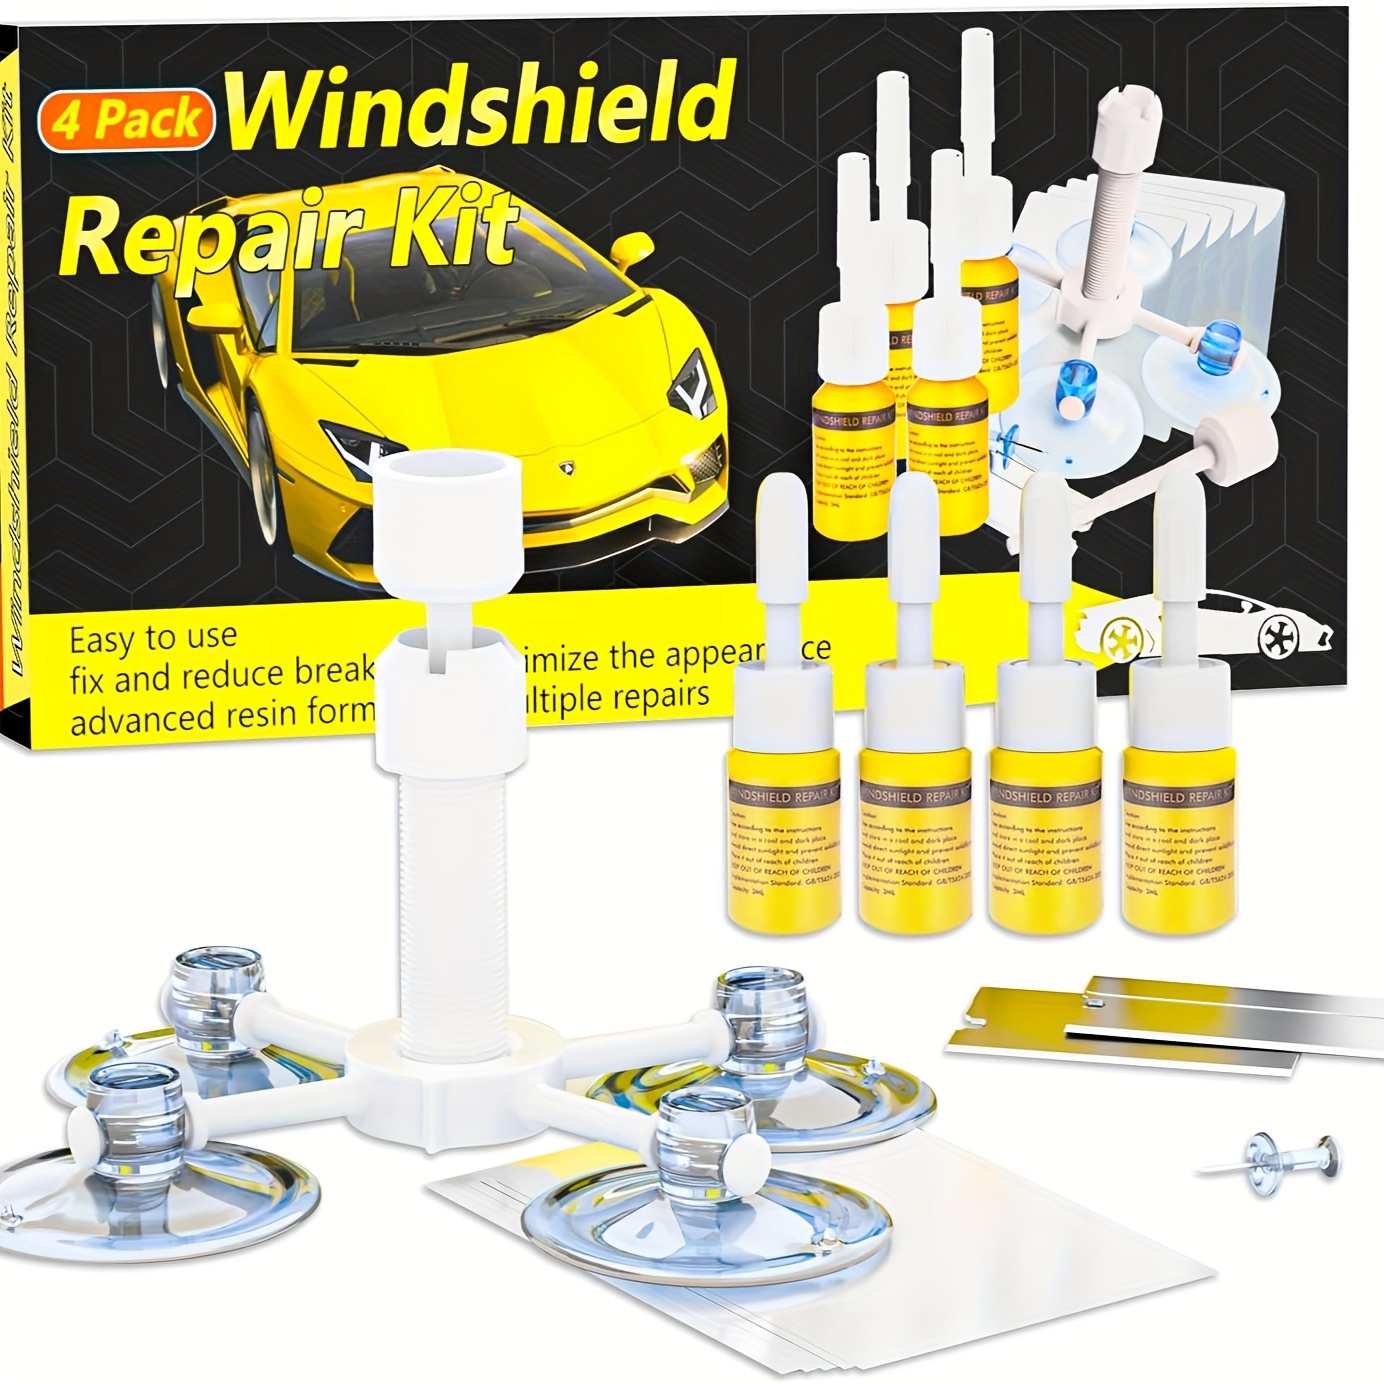 

Windshield Crack Repair Kit, Automotive Windshield Repair Kit For Chips And Cracks, Windshield Repair Kit With 4 Bottles Of Resin, Windshield Repair For Fixing Chips, Cracks, -eye And Star-shaped